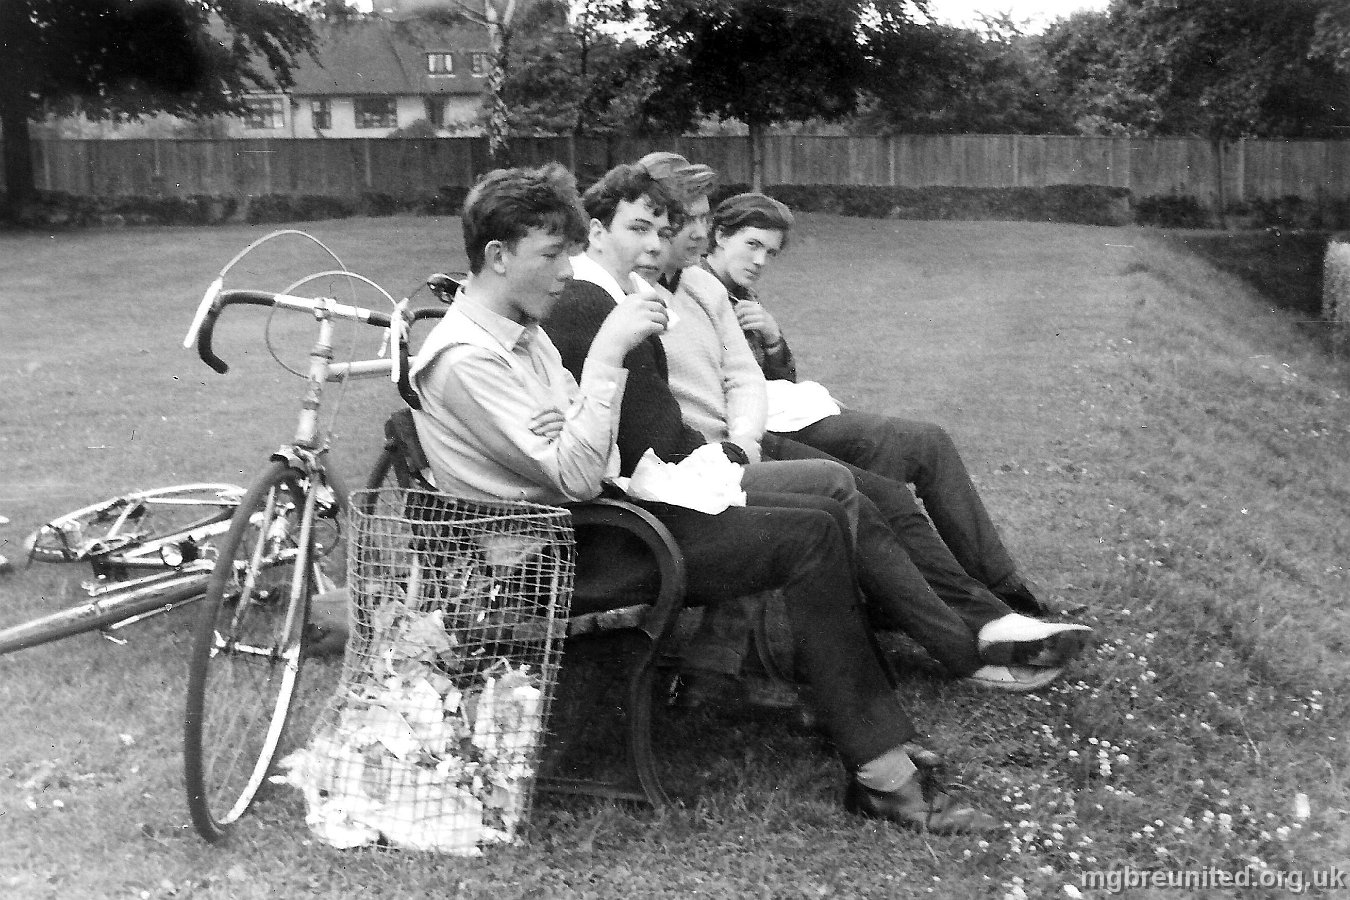 1965 ? Cycle ride to Southwell Patrick Elvin, Roger Gay, John McPherson and dk.